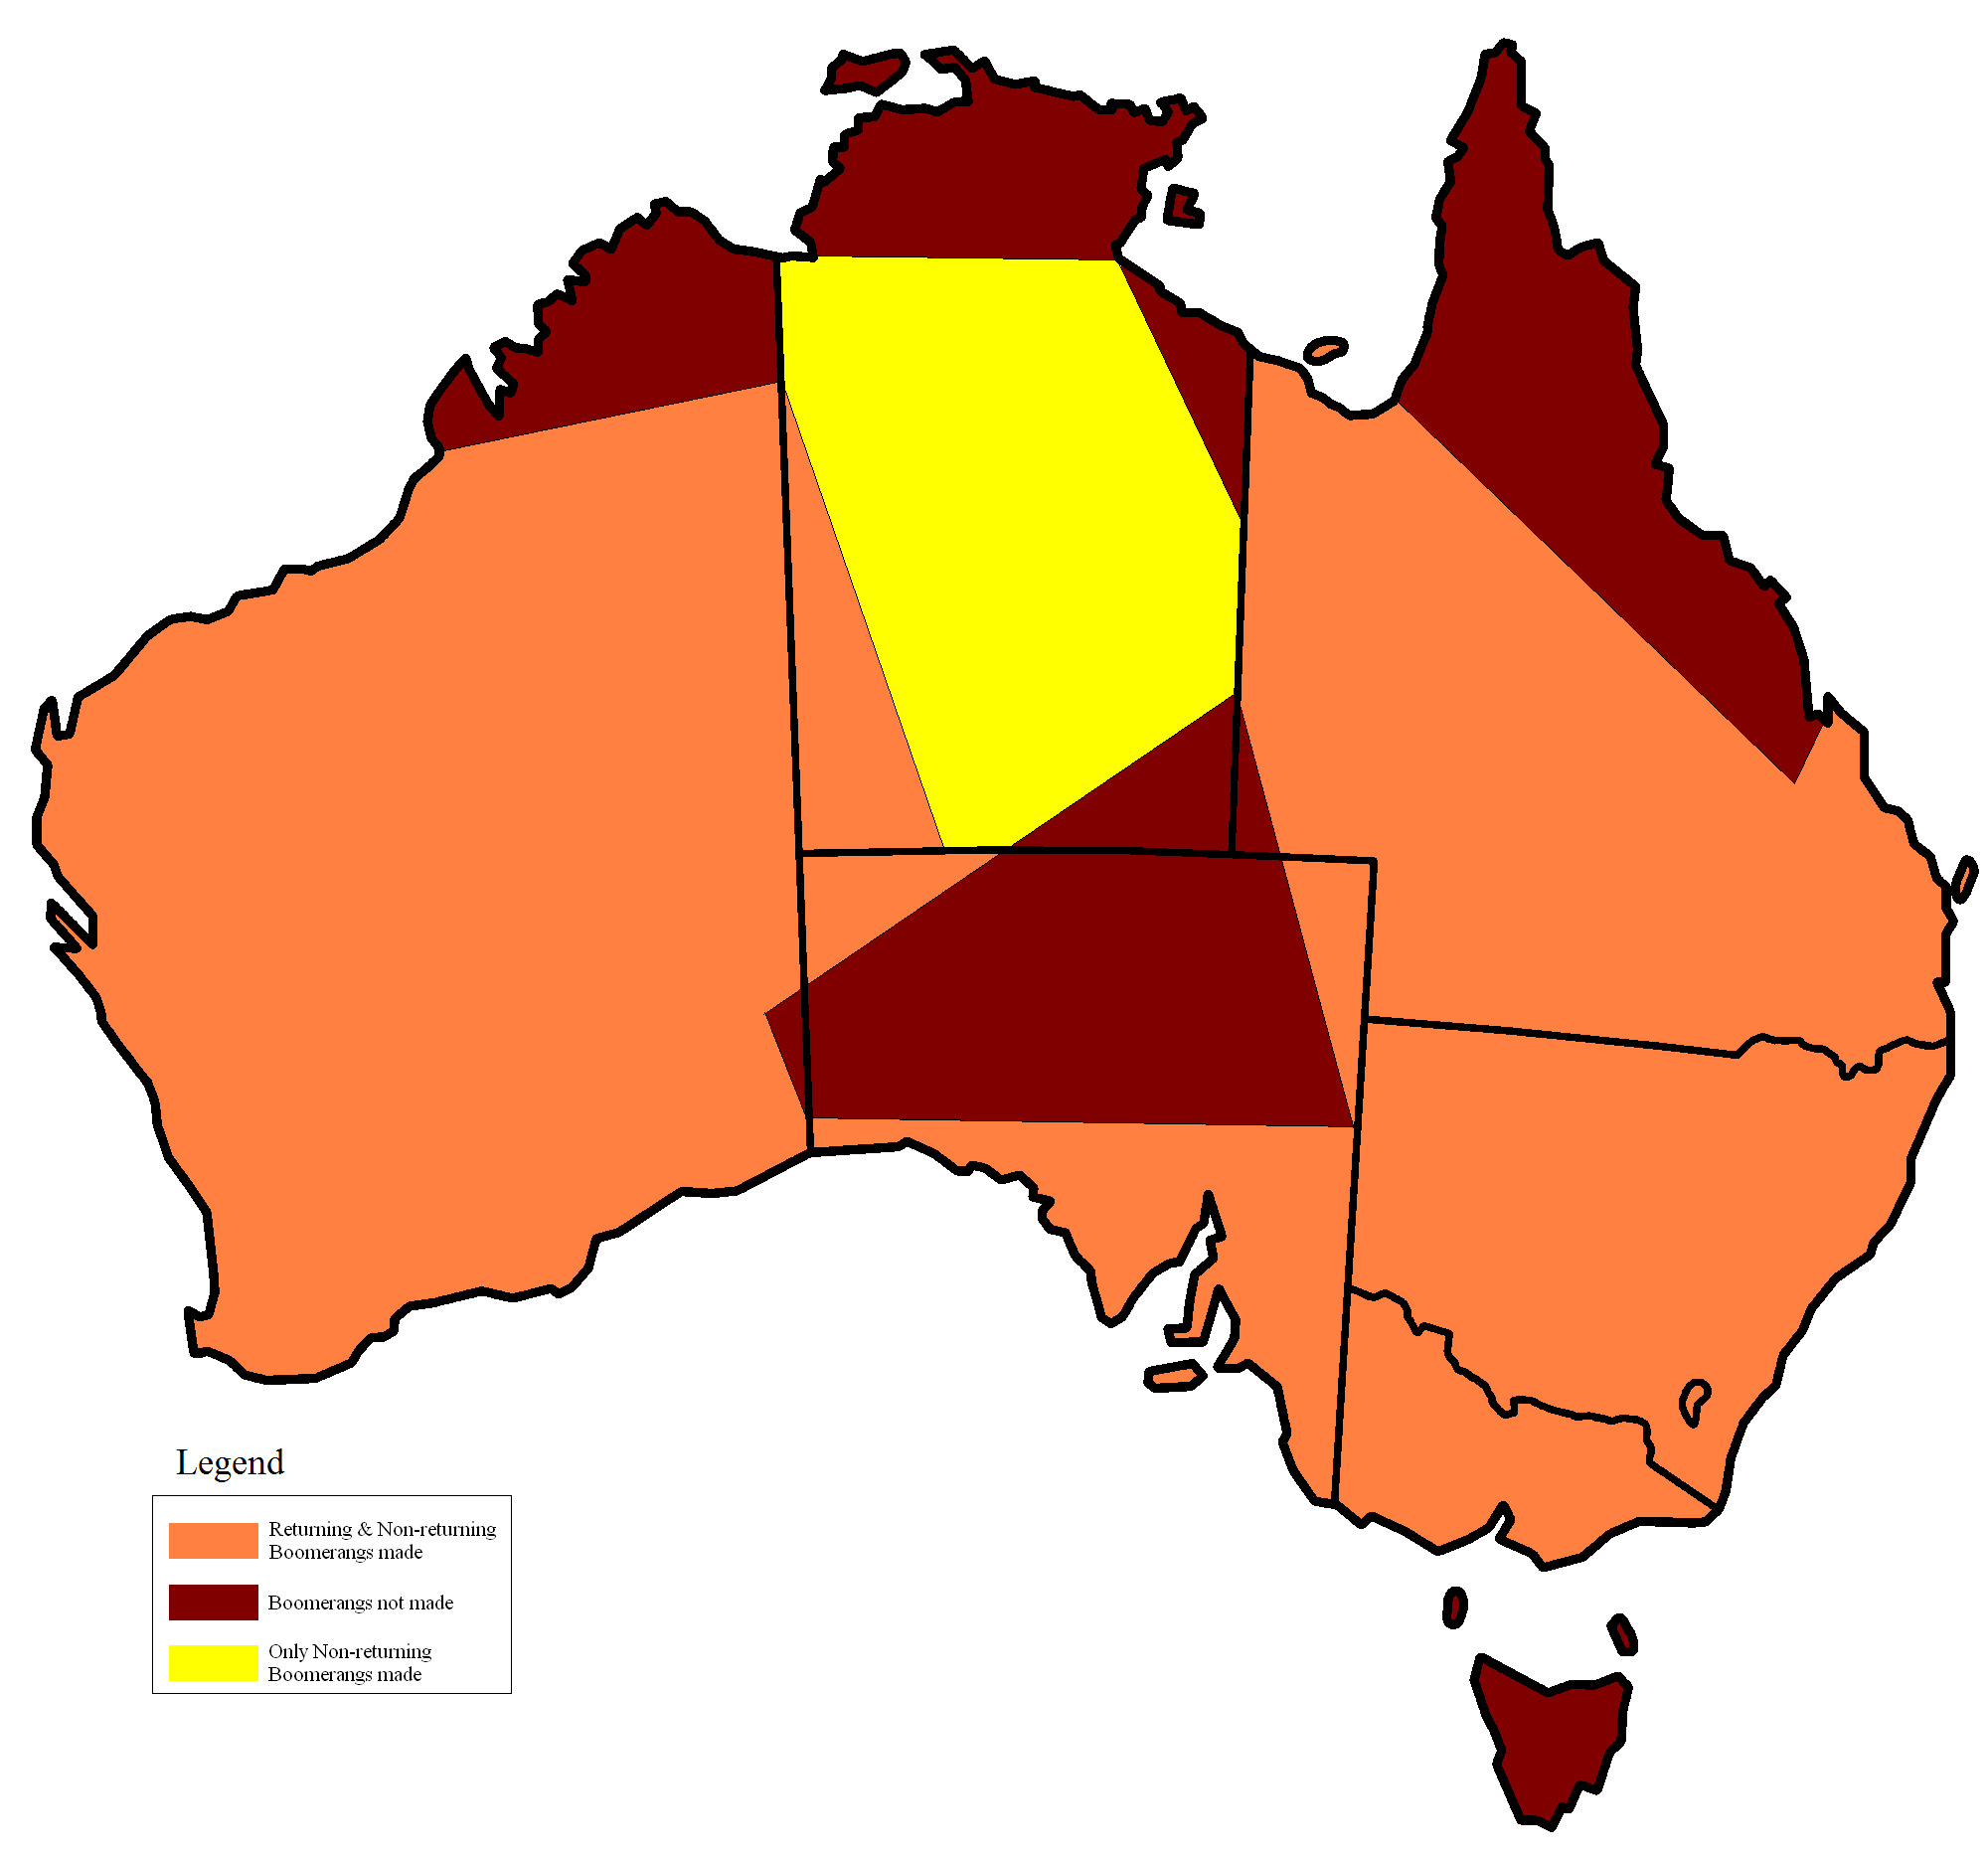 Map of Australia showing the distribution of boomerangs.